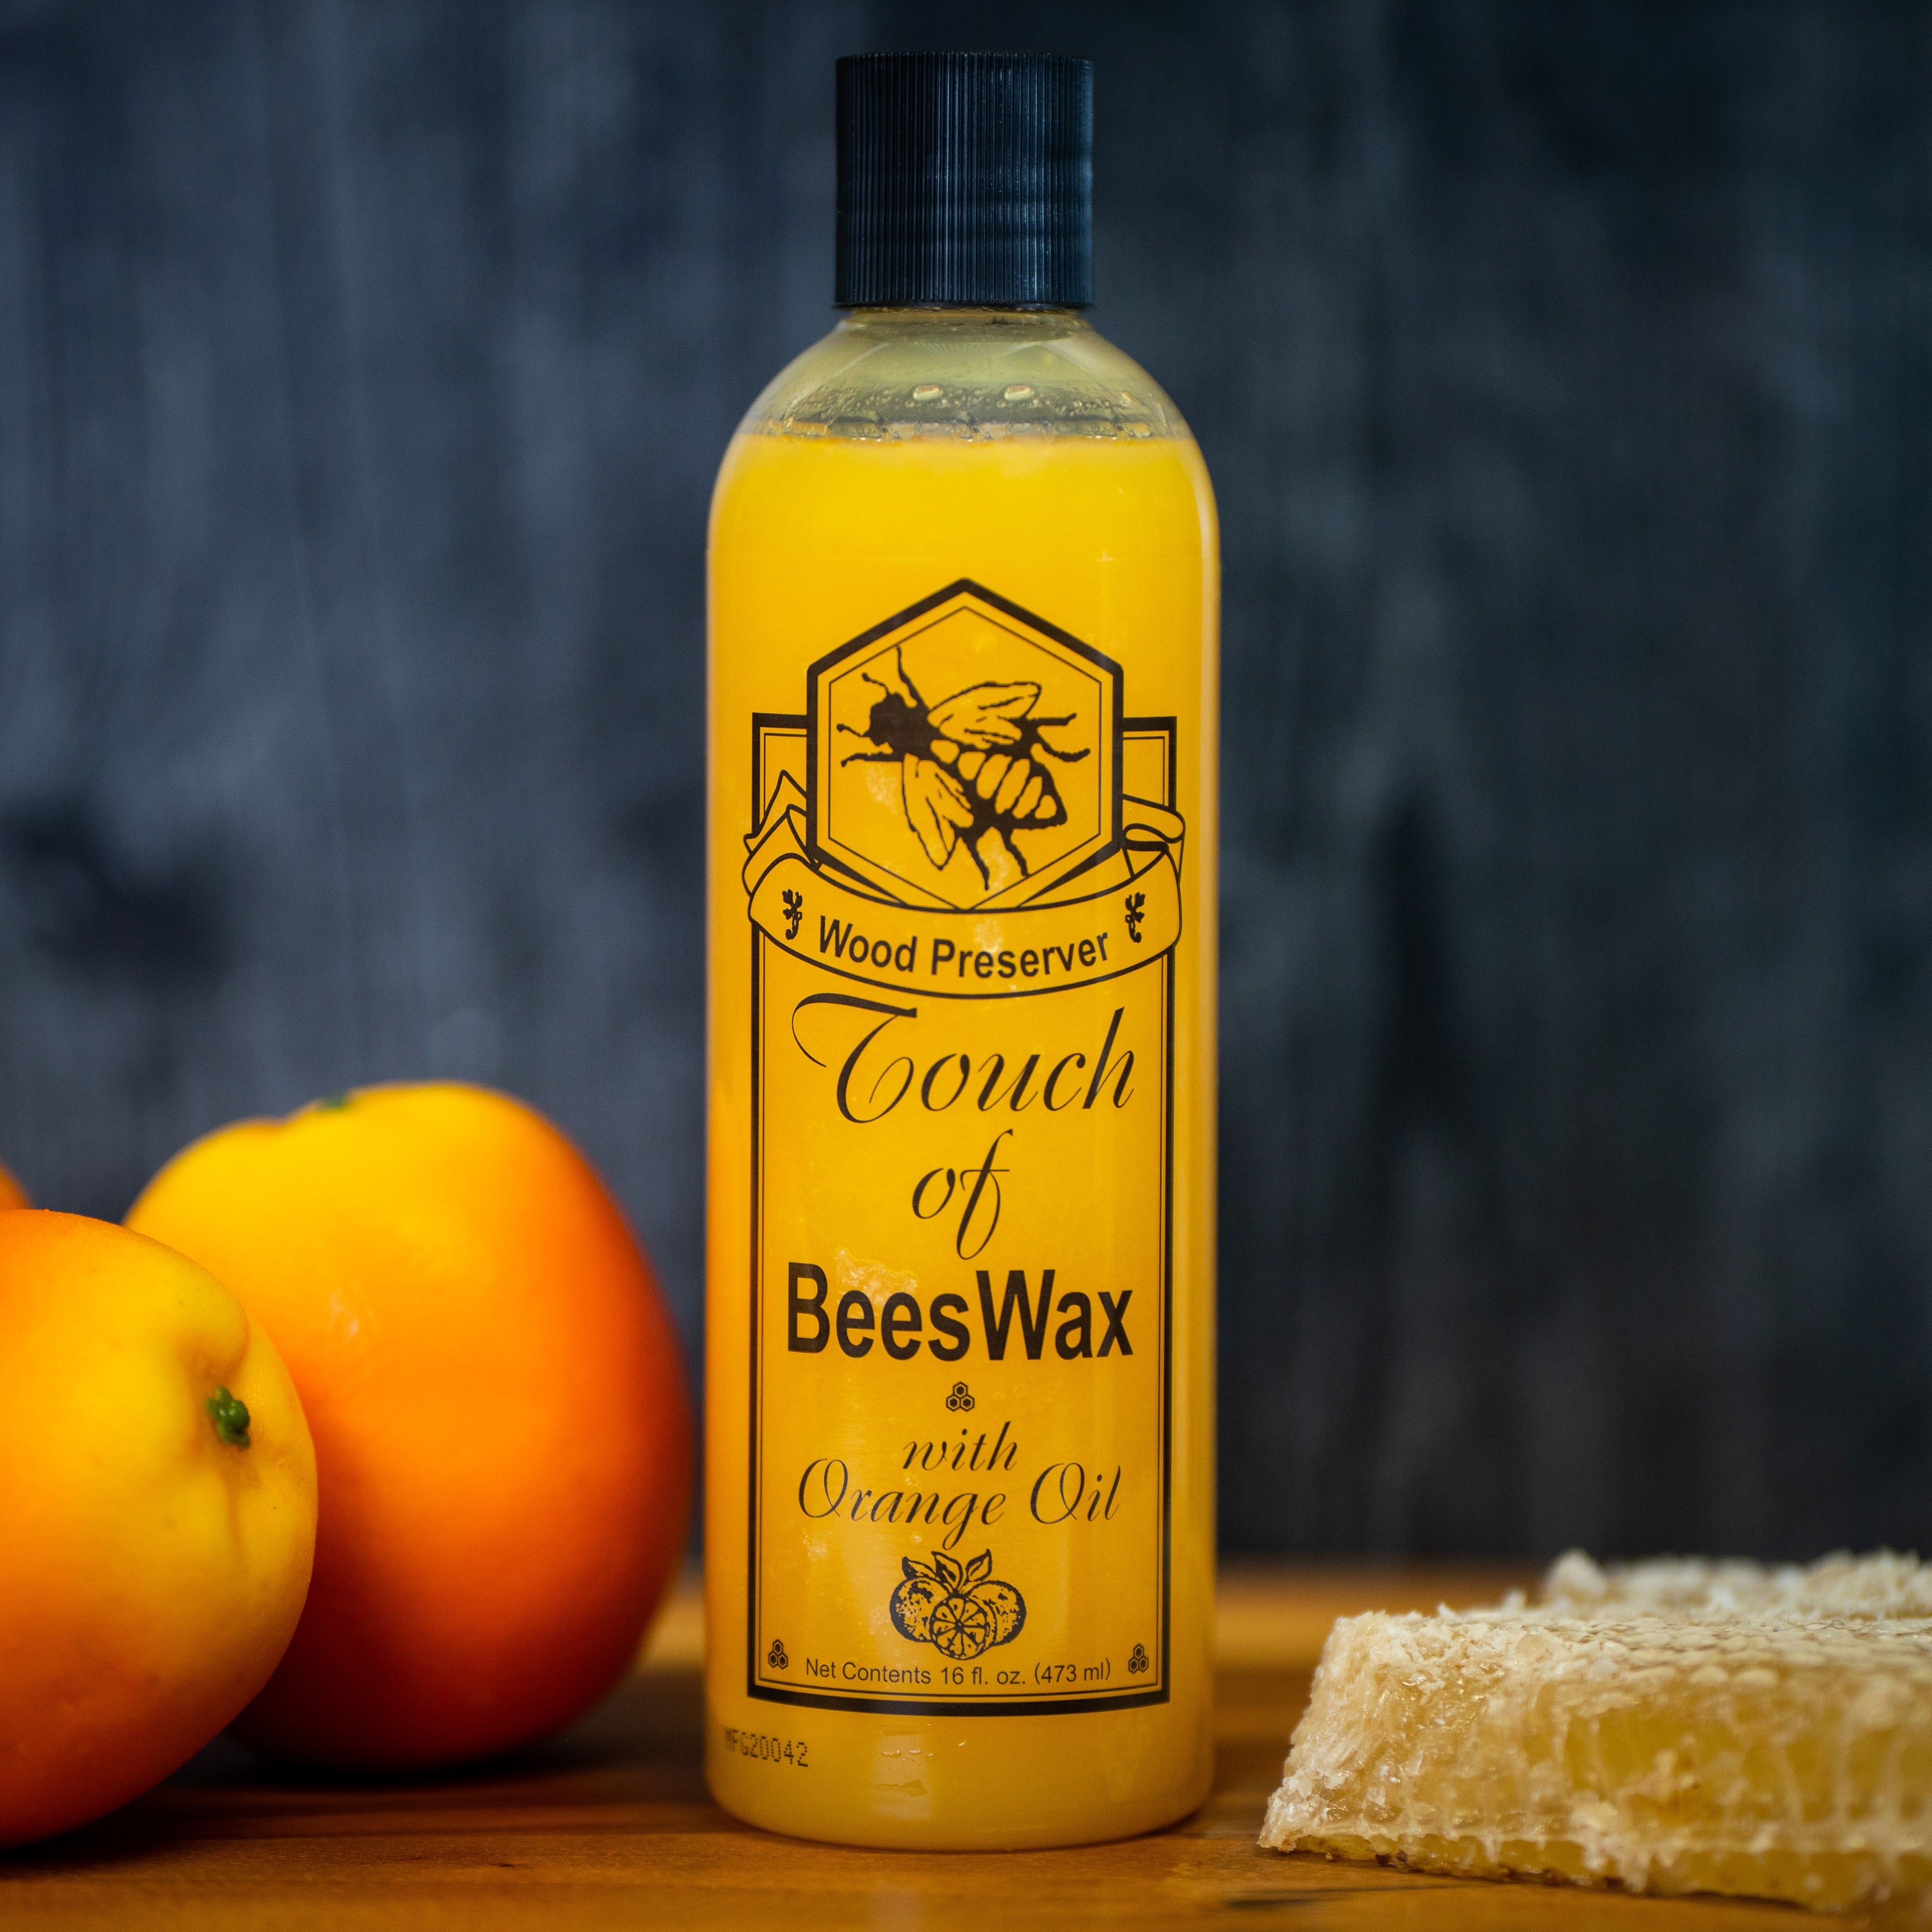 Beeswax Wood Polish  The Benefits of Beeswax Wood Polish and Finish -  Touch Of Oranges